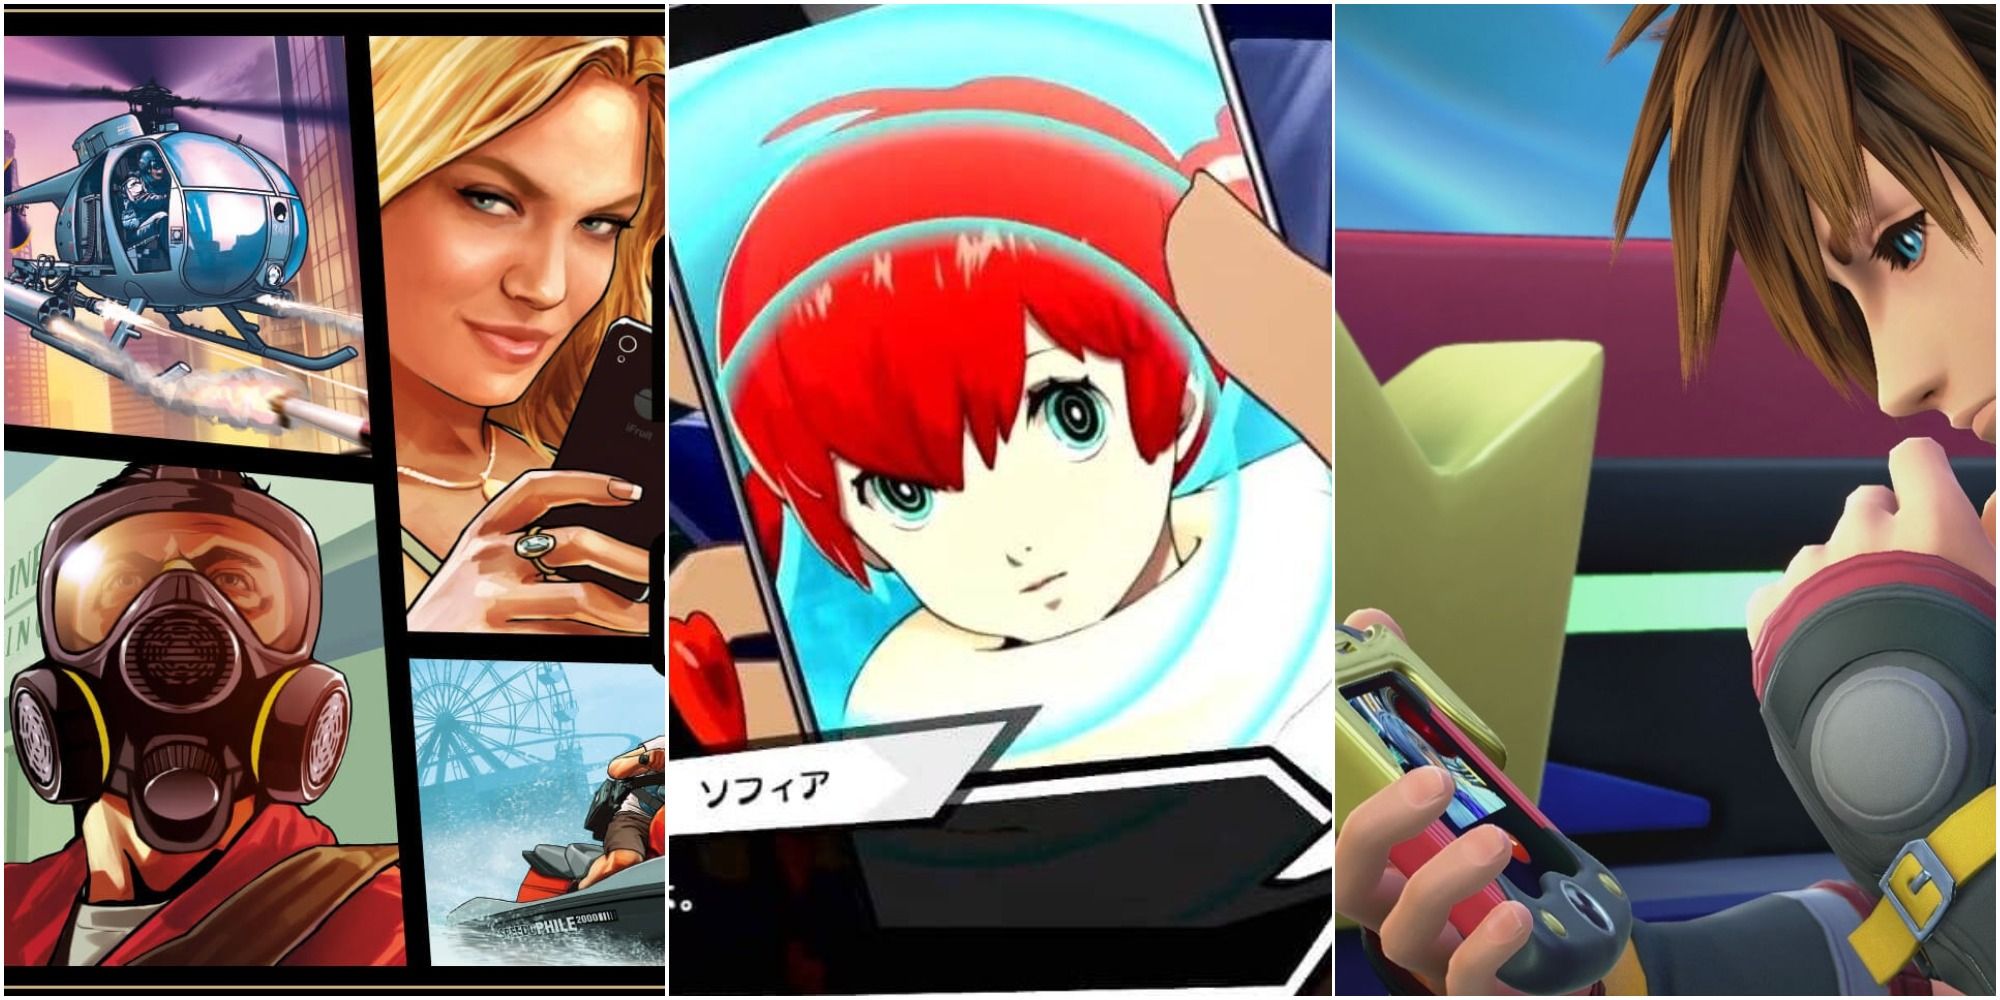 The cover art for GTA 5, an image of Sofia on the phone in Persona 5 Strikers, and Sora using the Gummi Phone, left to right